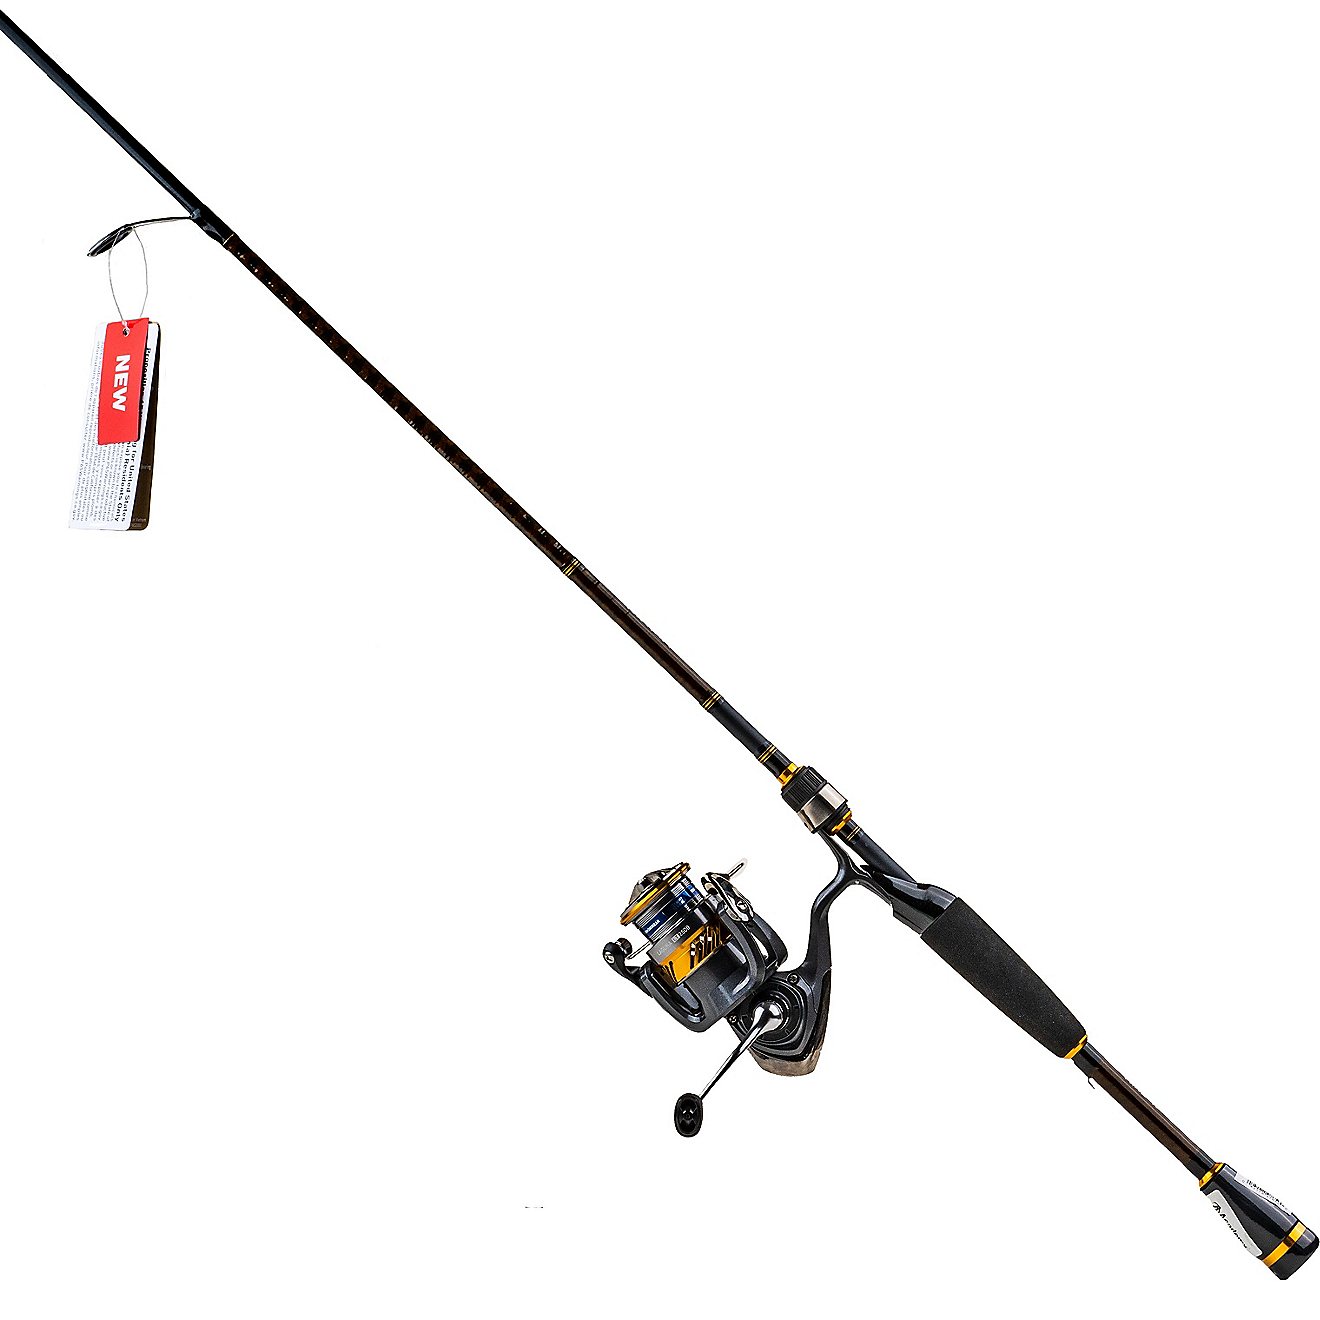 Daiwa Aird X Laguna 6 ft 6 in M Spinning Combo                                                                                   - view number 2